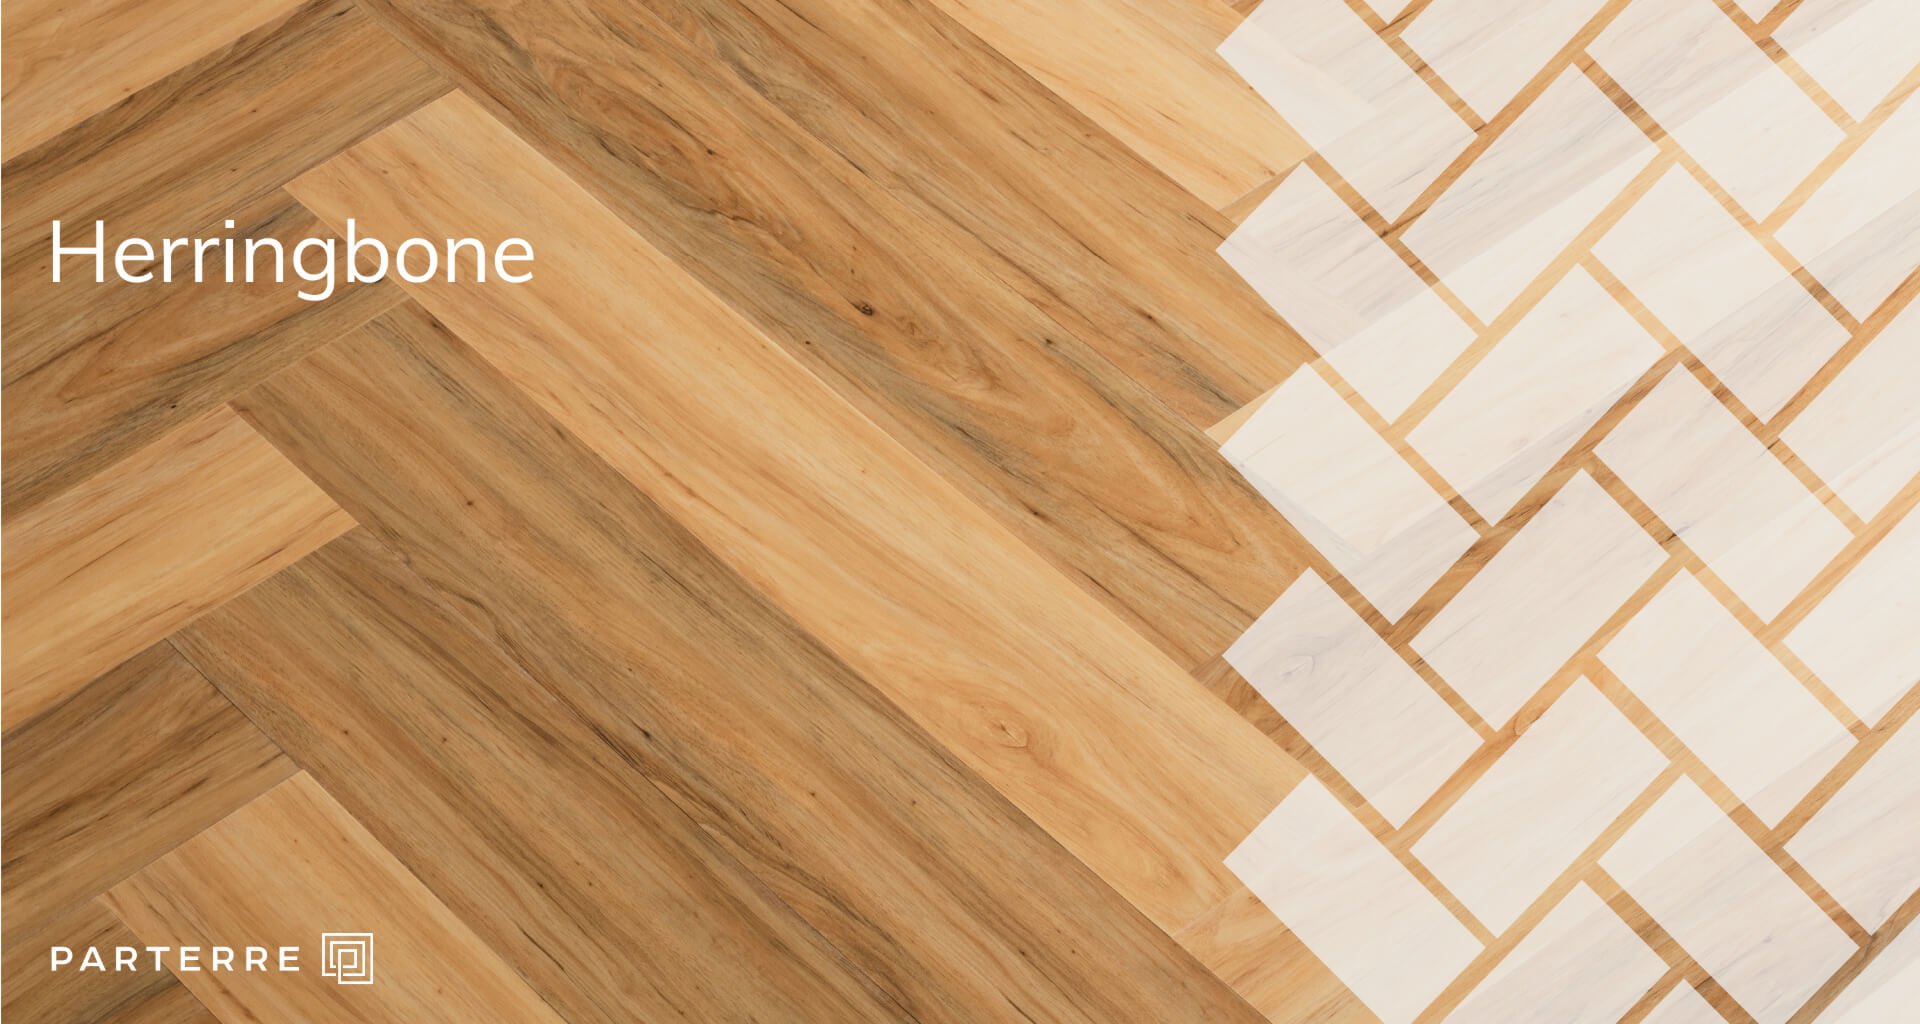 9 Vinyl Flooring Patterns For Your Next, Laminate Flooring Patterns And Colors